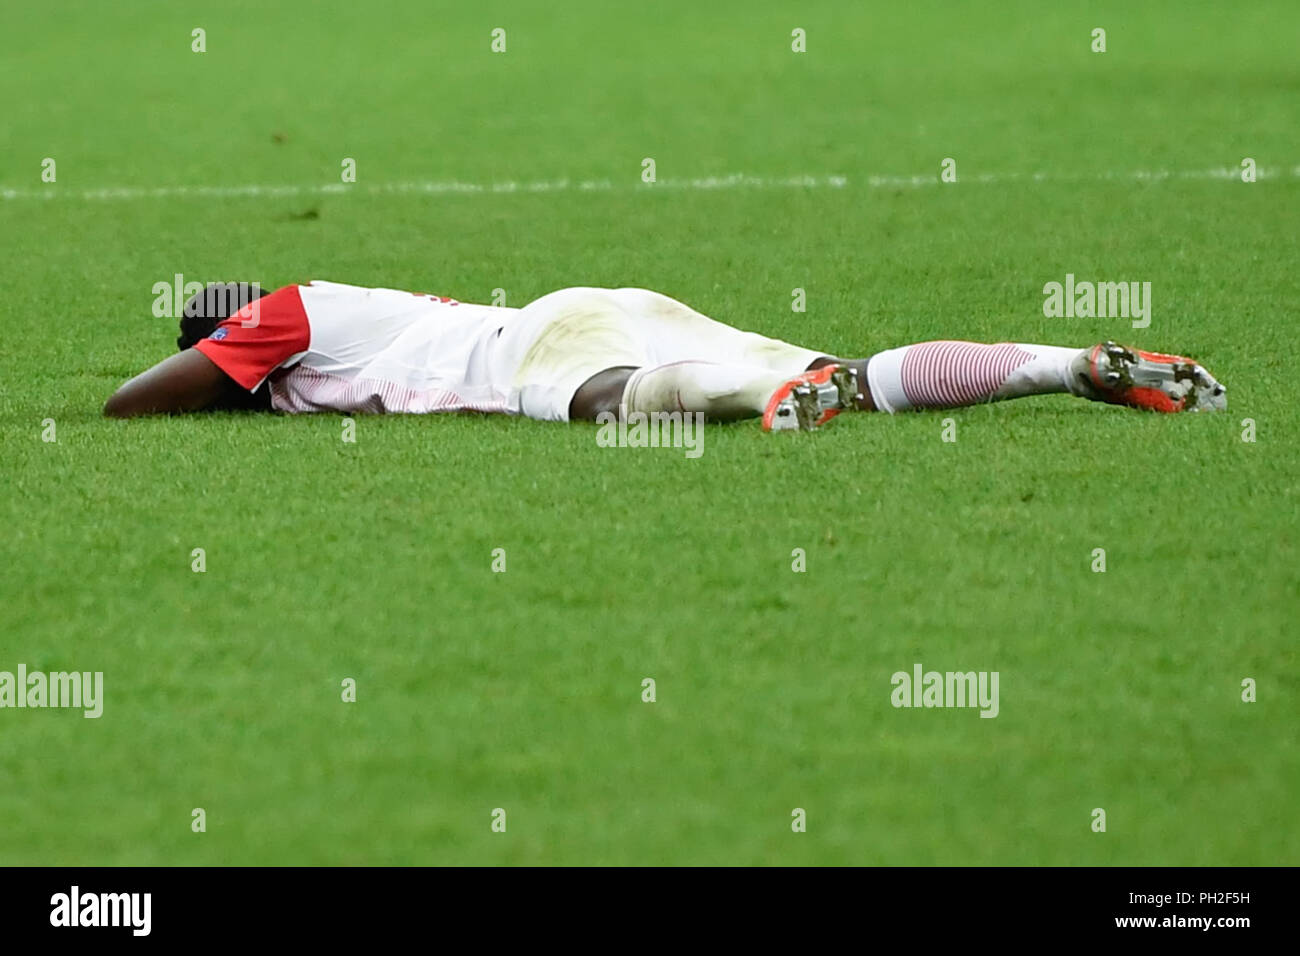 Salzburg, Austria August 29, 2018: CL - Quali - 18/19 - RB Salzburg Vs. Red Star Belgrade Reinhold Yabo (FC Salzburg), lies on ground, action/single image/cut out/dissatisfied/disappointed/disappointed/dejected/frustratedriert/| usage worldwide Stock Photo